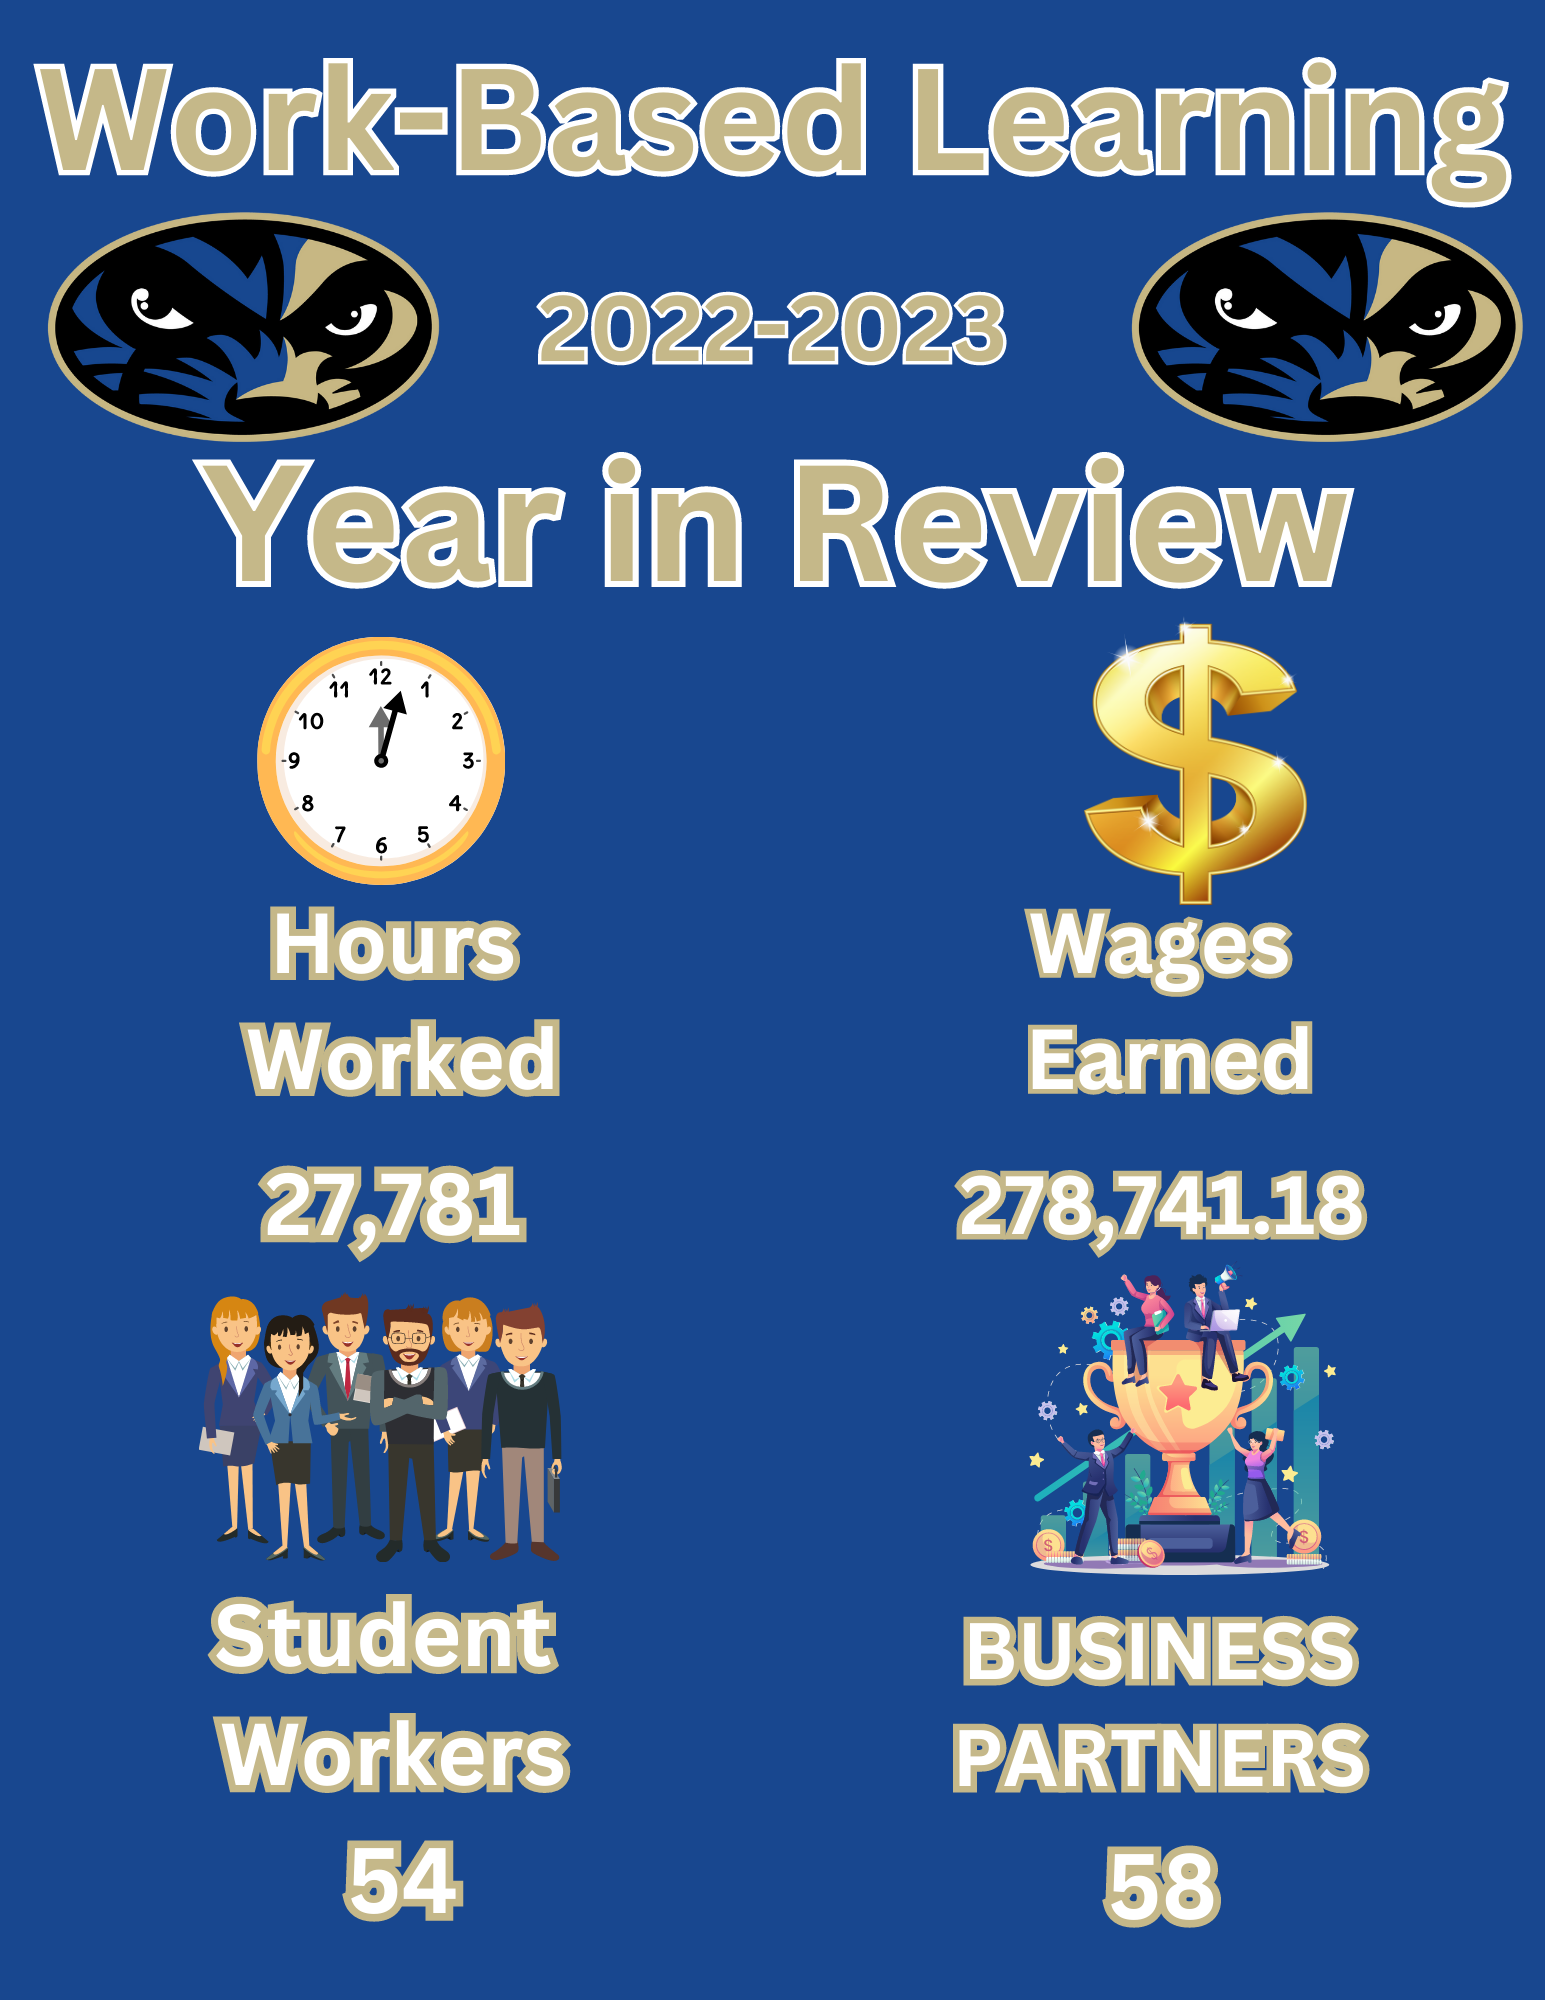 Work Base Learning Information Graphic - 2022 - 2023 Year in Review